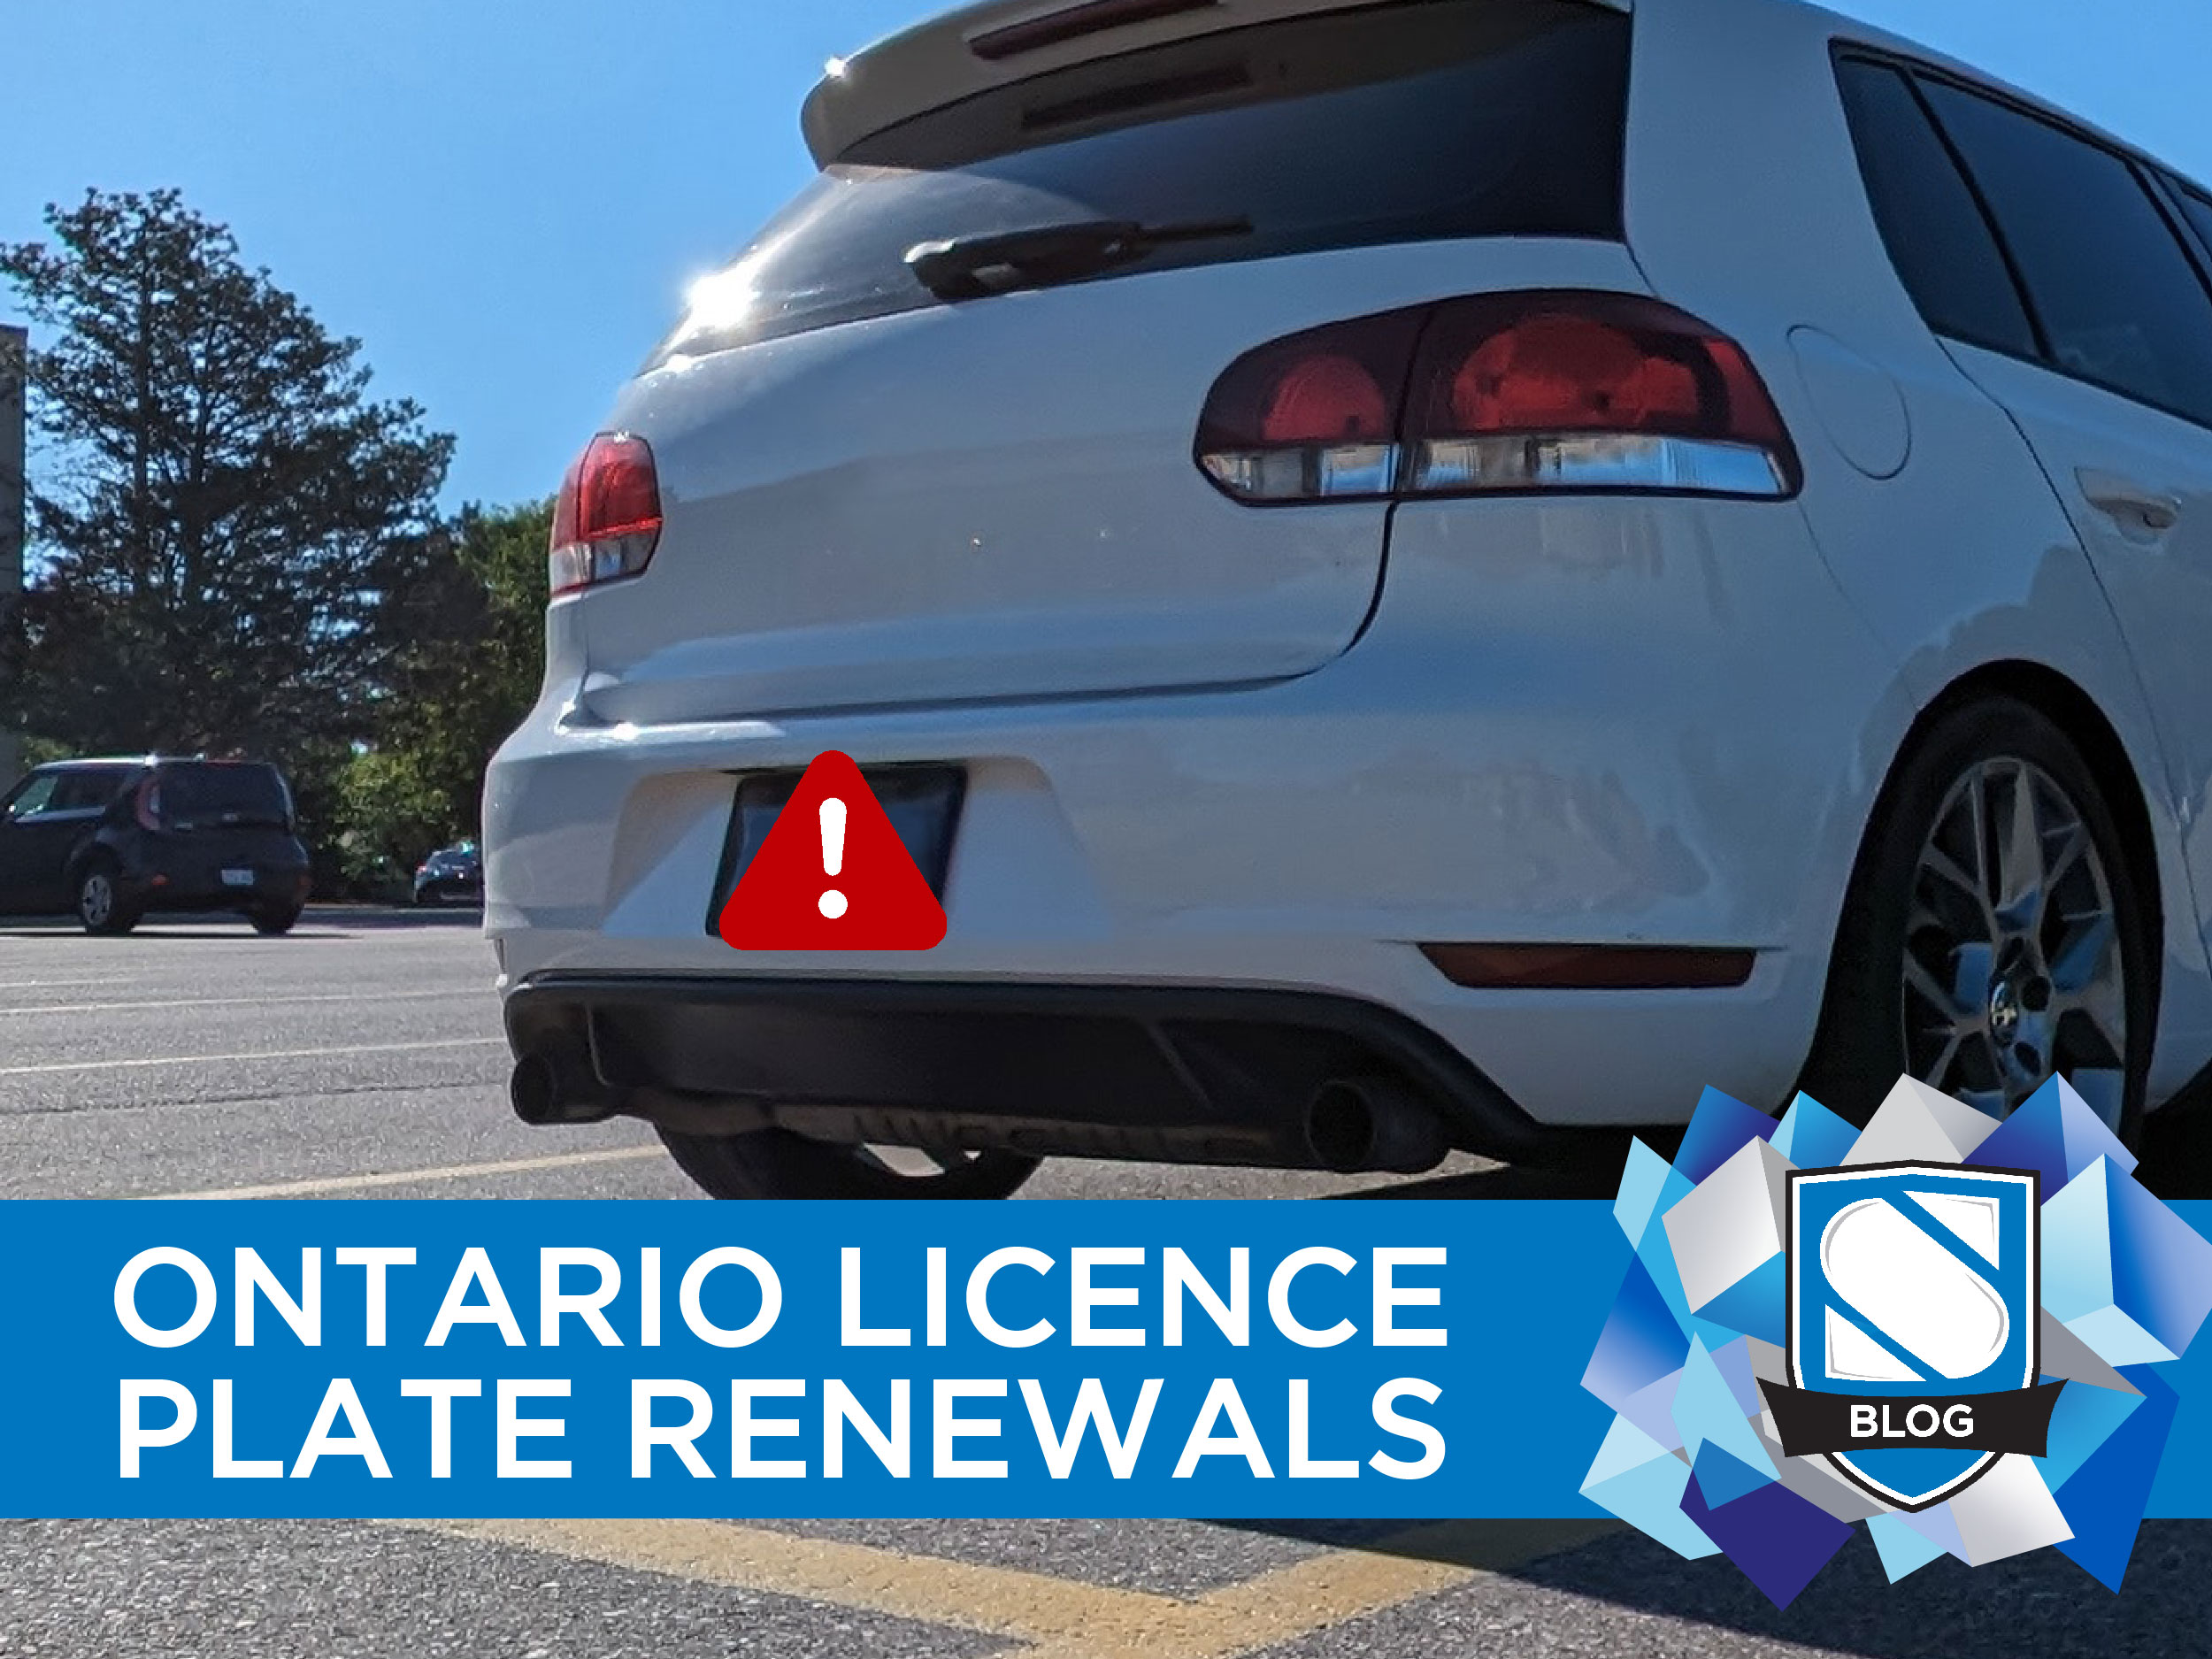 HEADS UP: Automatic Ontario Licence Plate Renewals begin on July 1